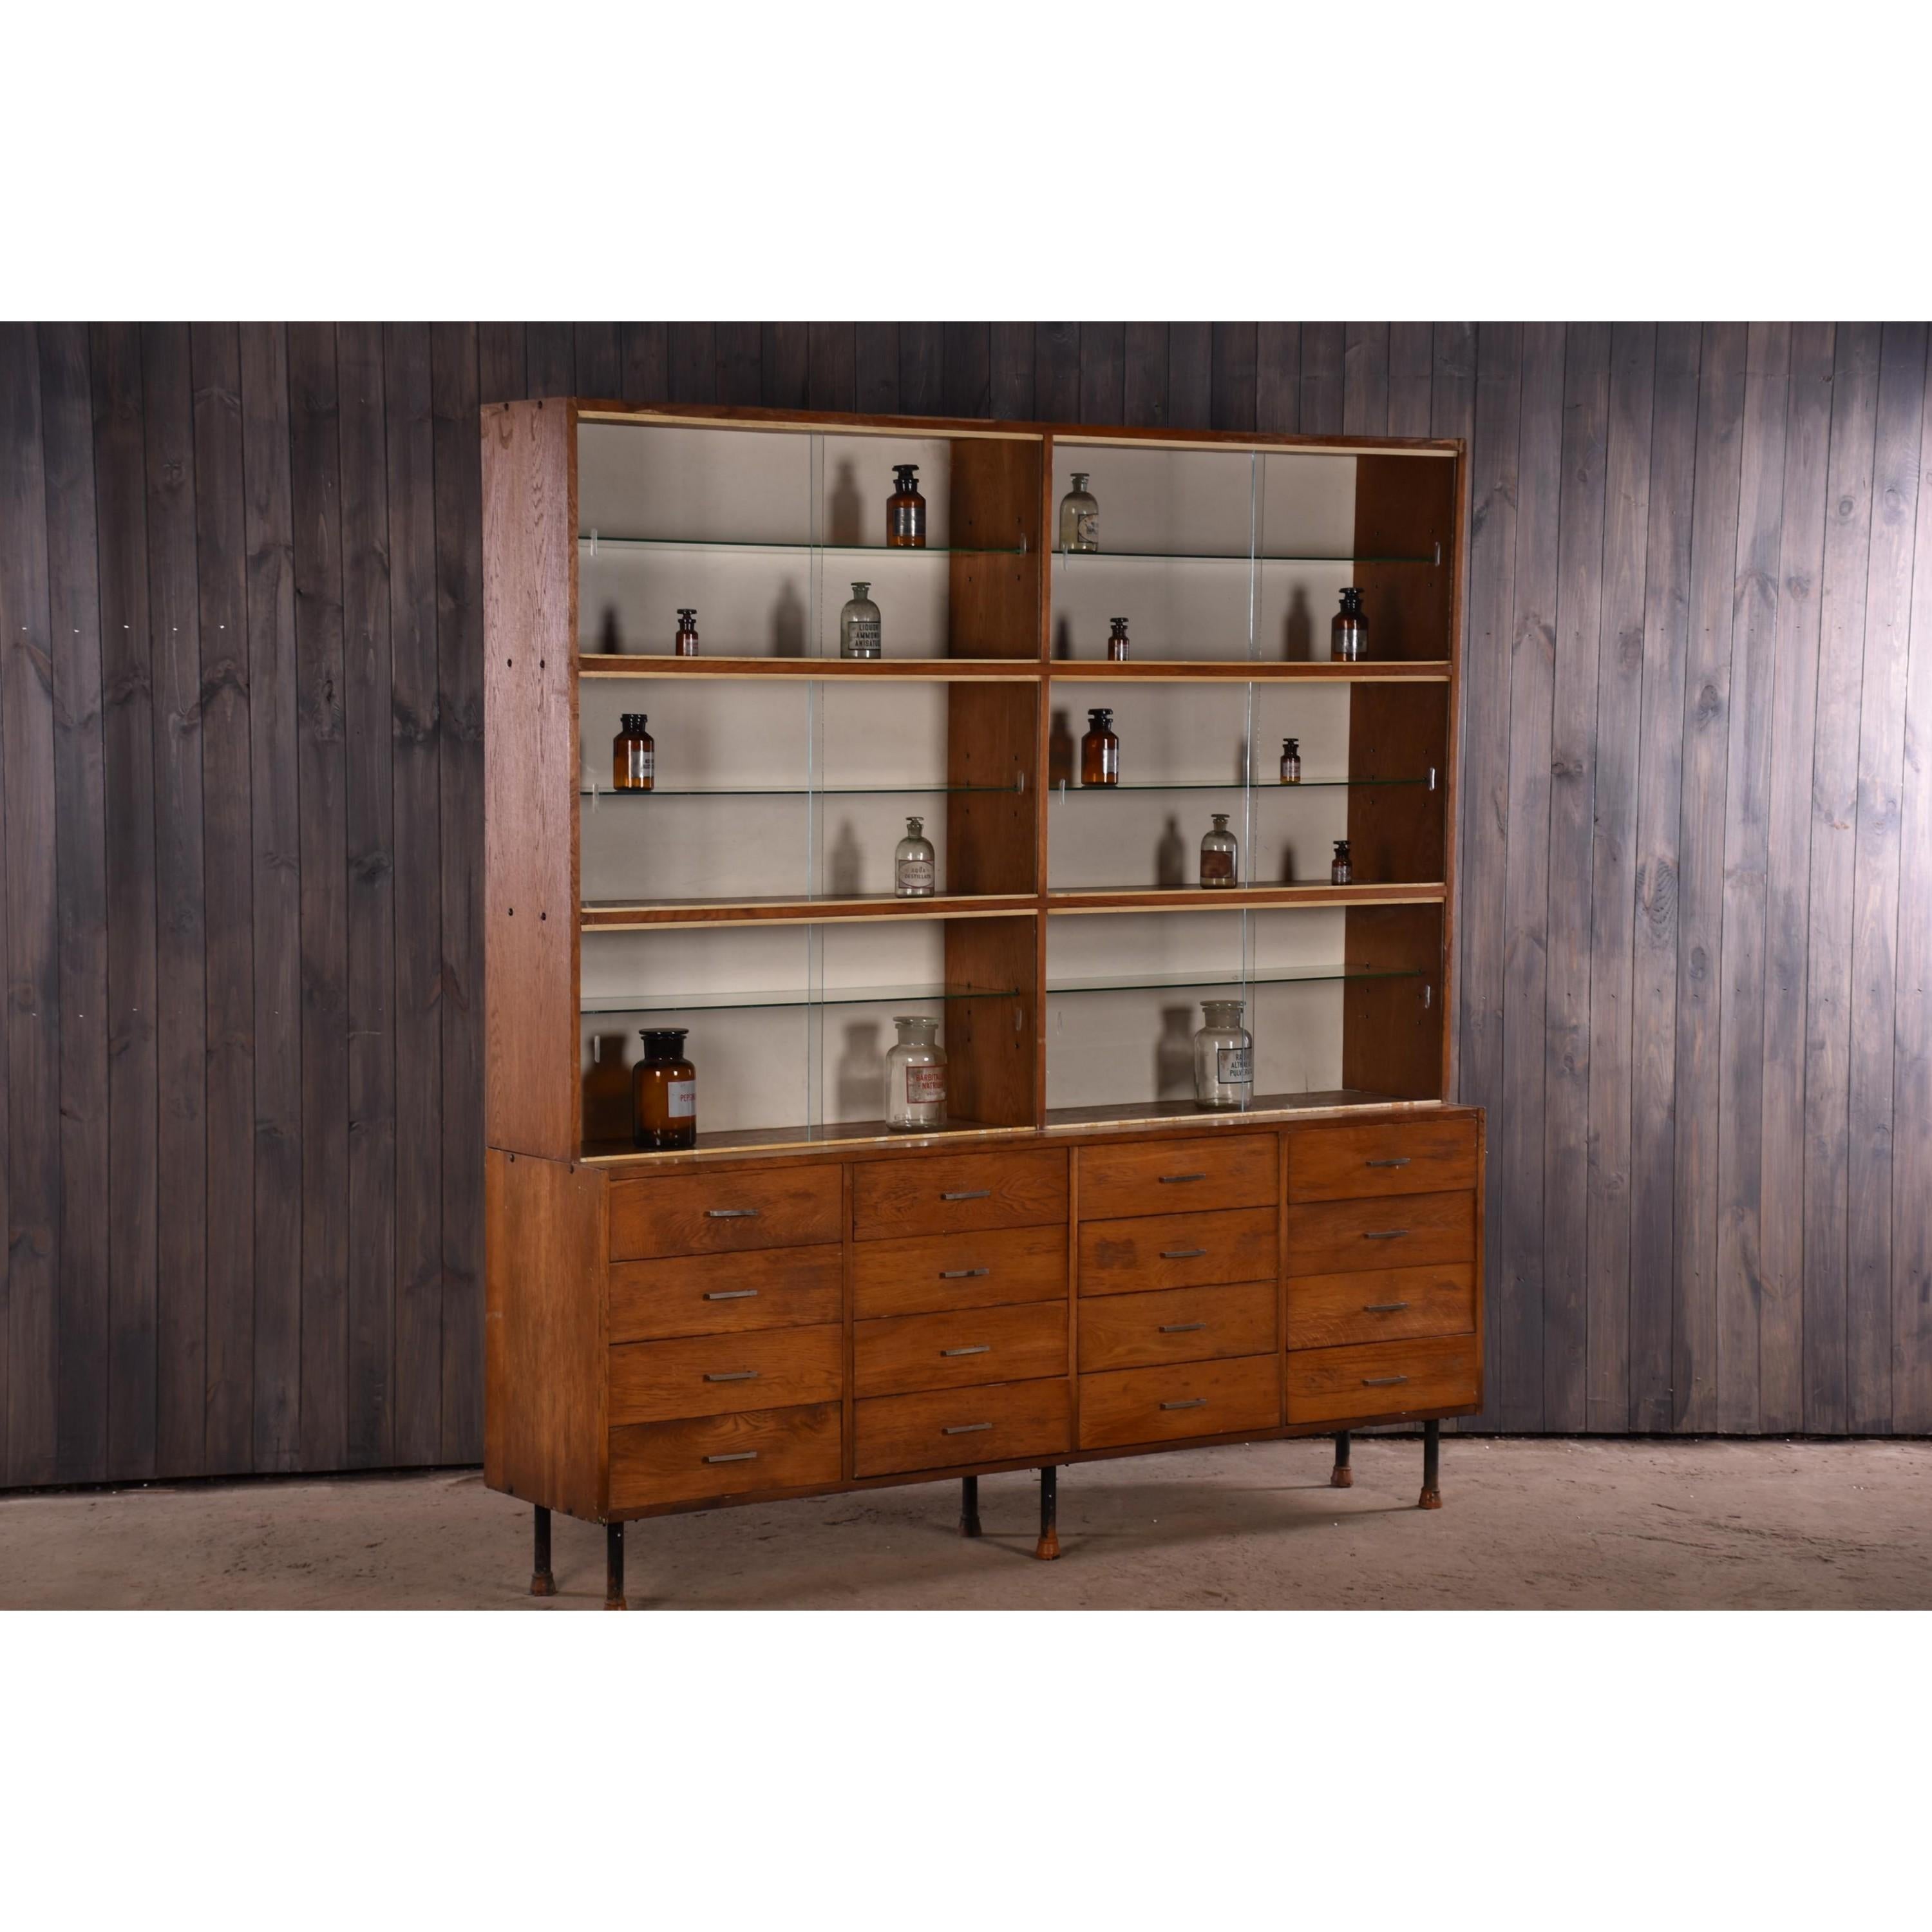 Apothecary Haberdashery Display Cabinet circa 1930s Number 12 2